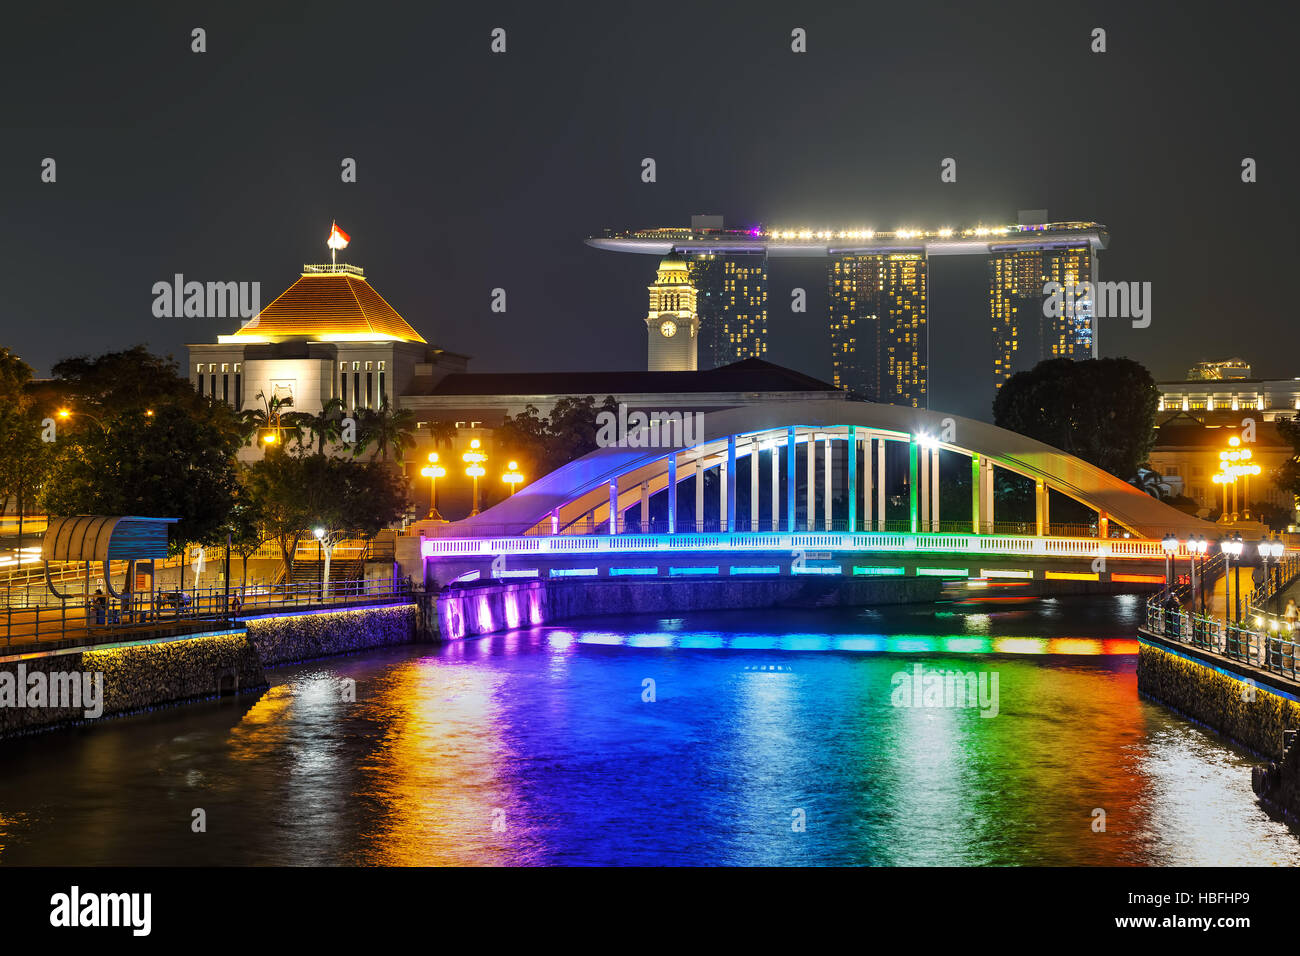 Overview of Singapore with the Elgin bridge Stock Photo